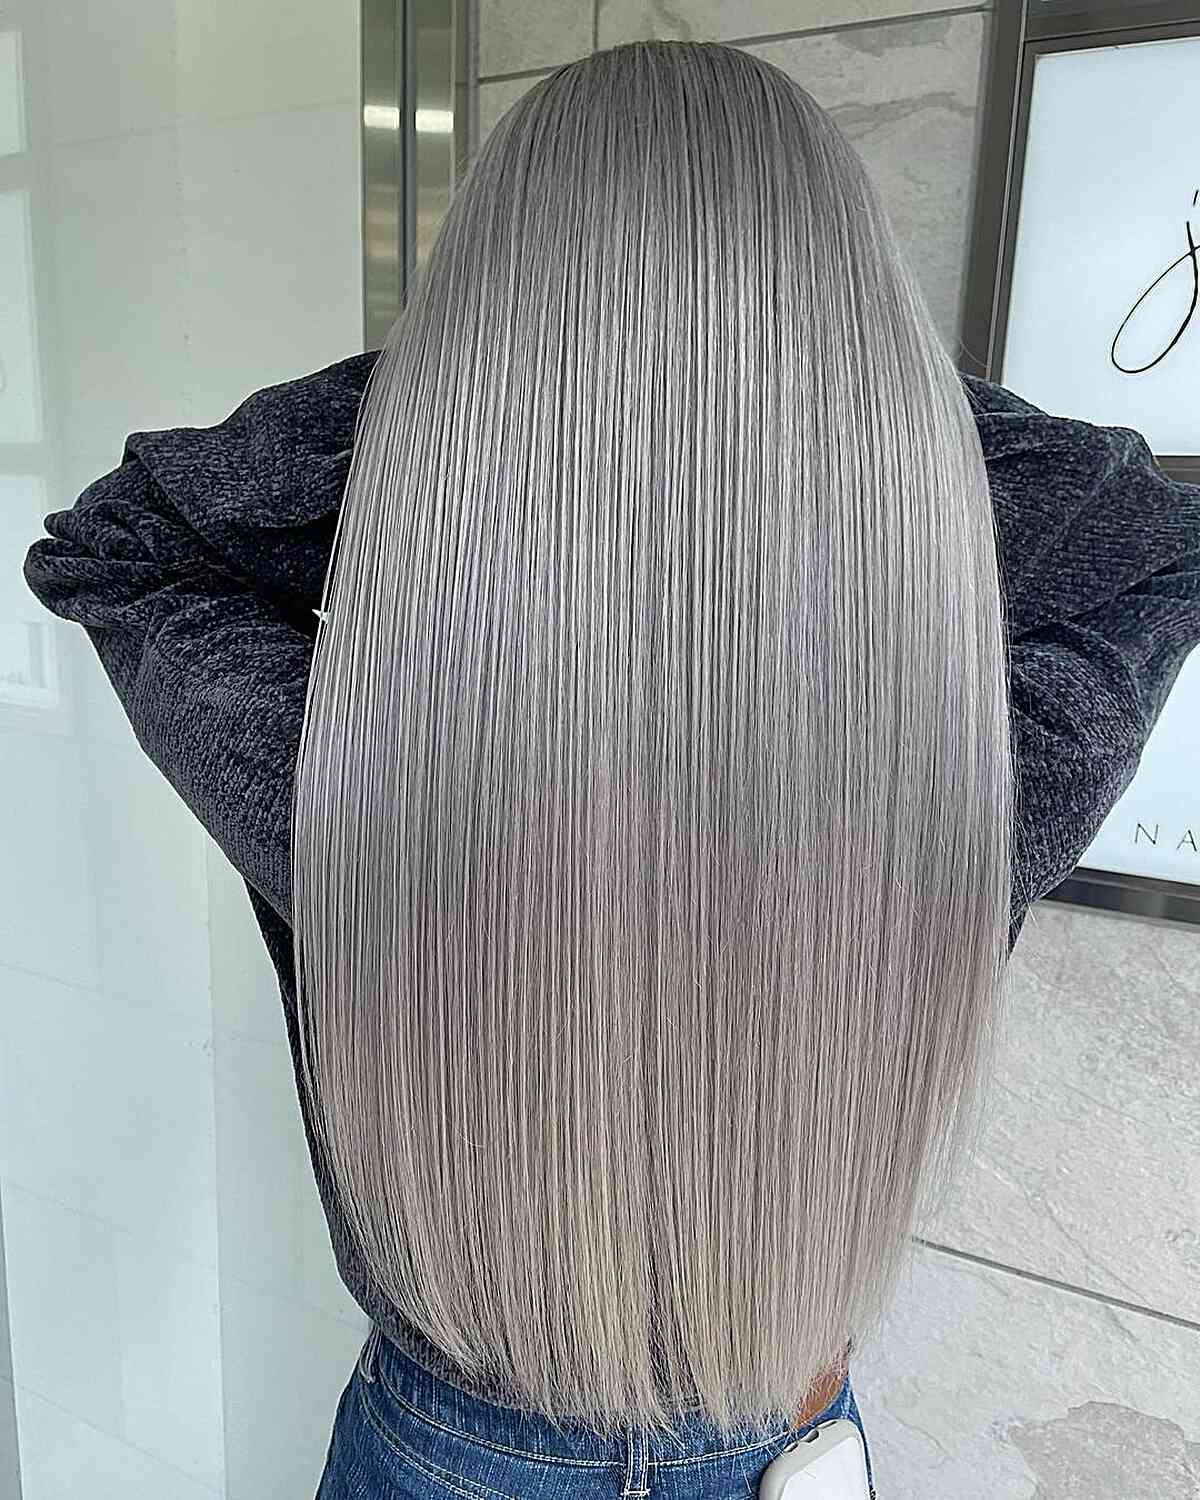 Stick-Straight Silver Blonde Hairstyle